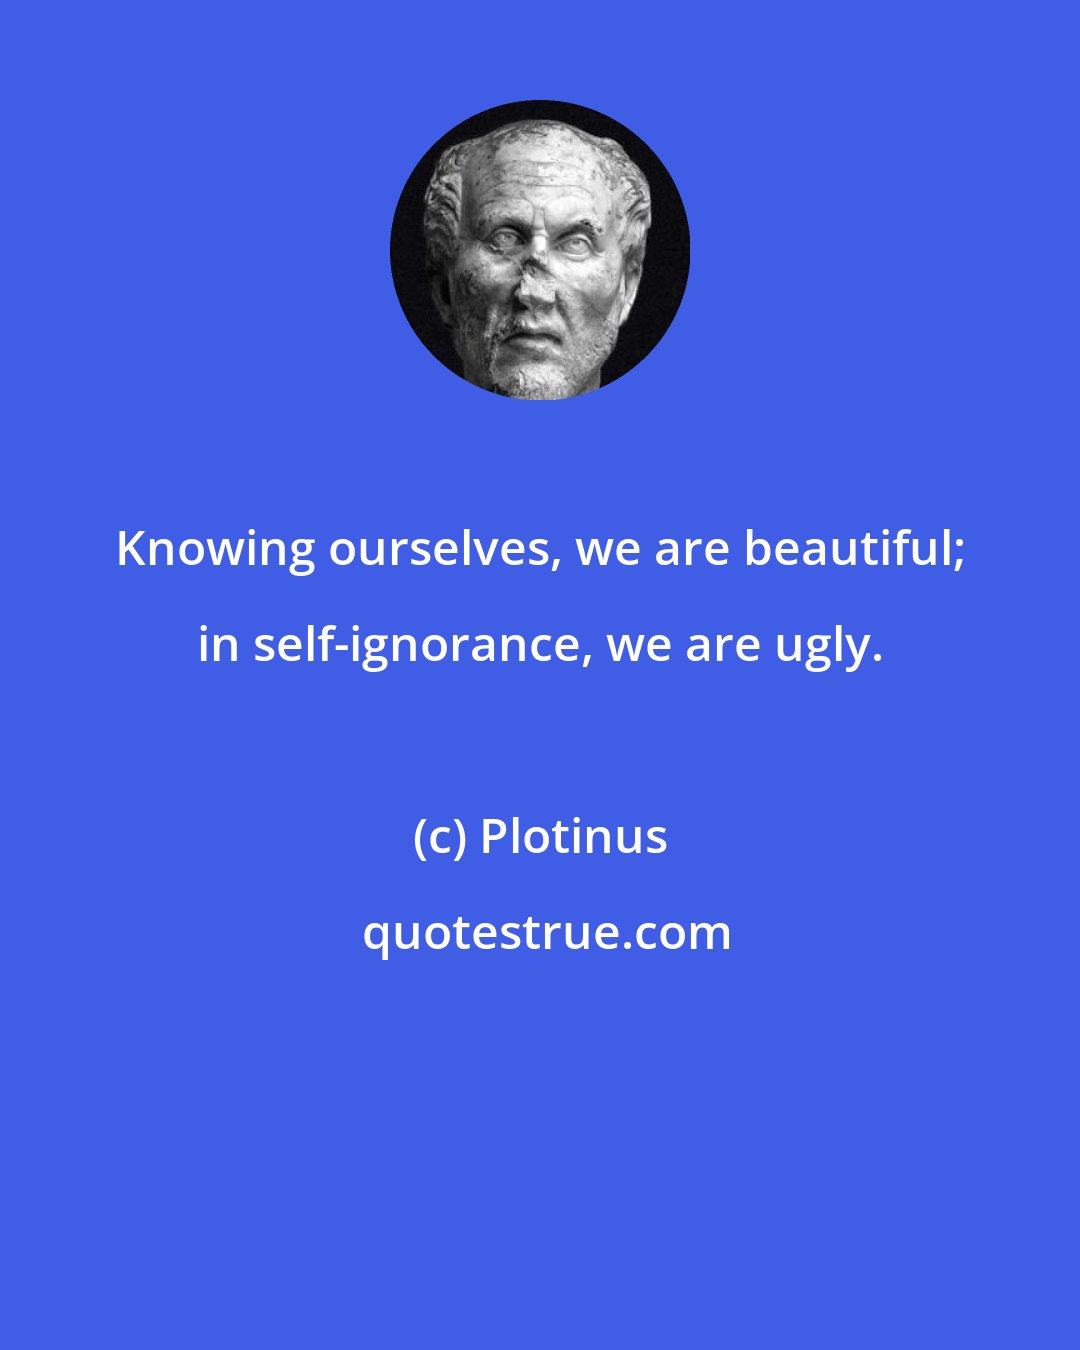 Plotinus: Knowing ourselves, we are beautiful; in self-ignorance, we are ugly.